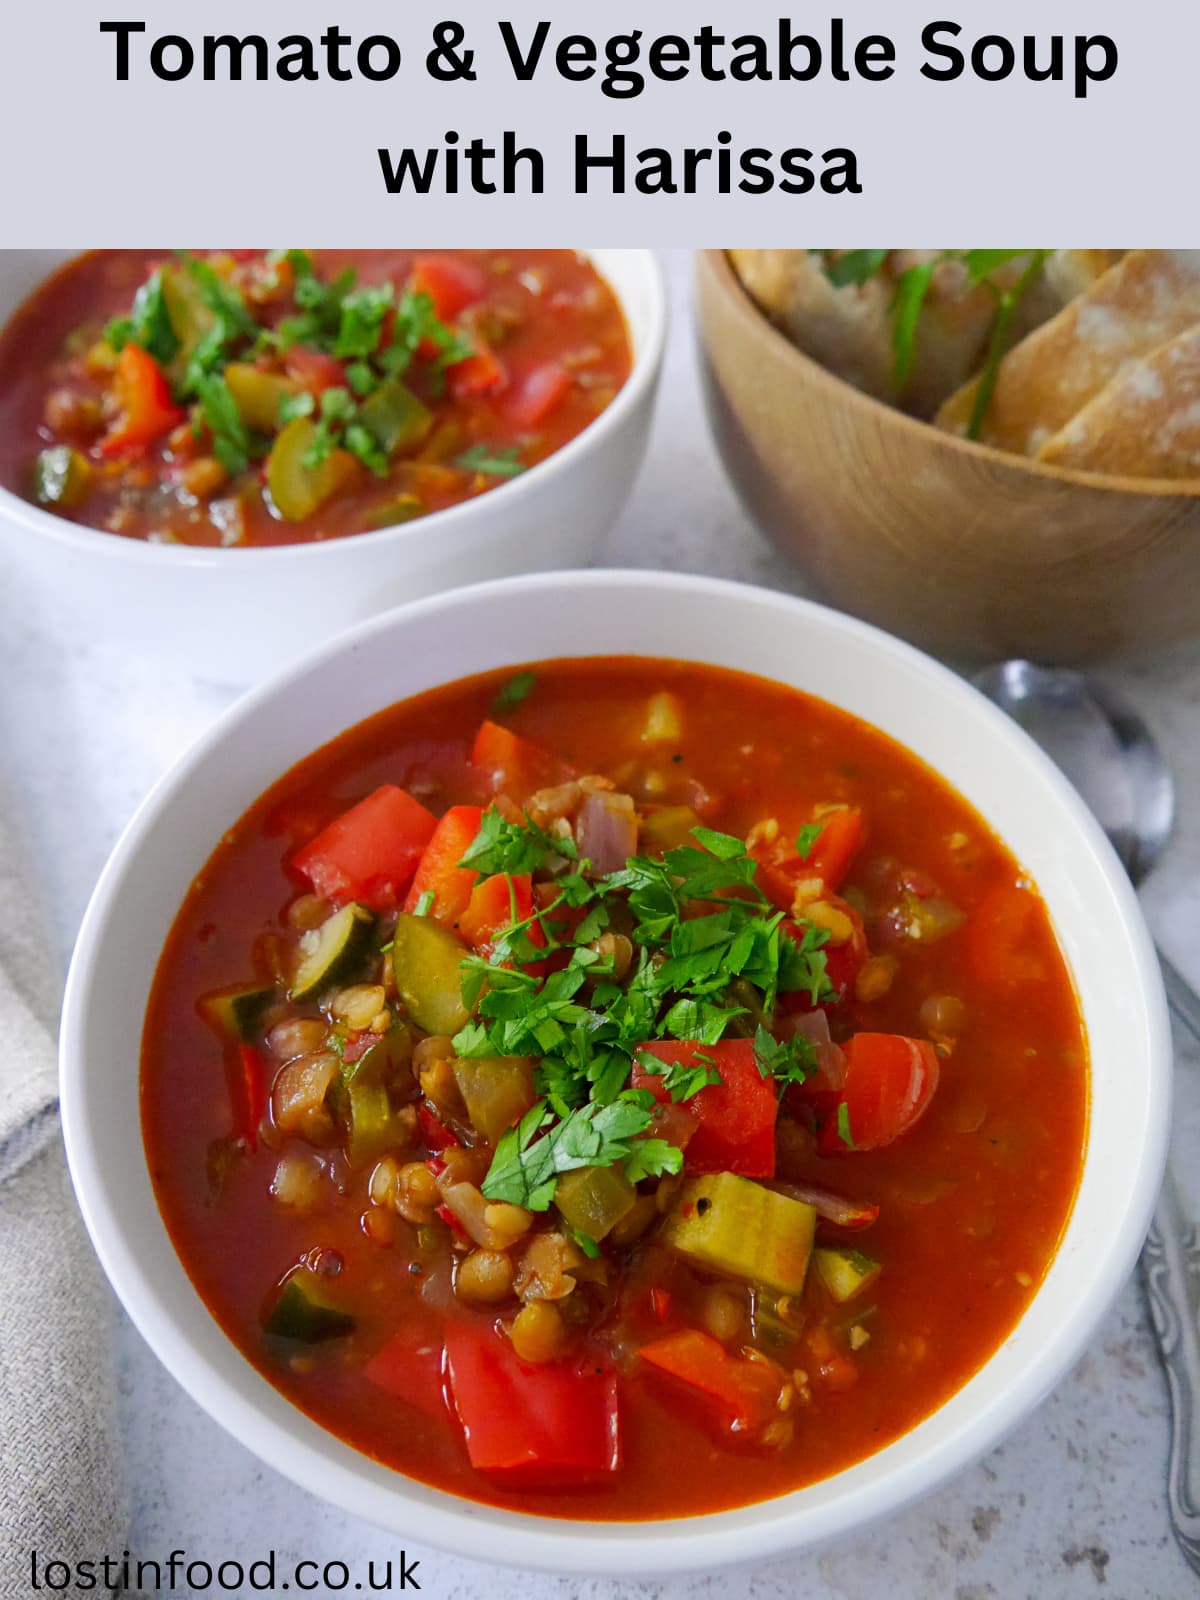 Pinnable image with recipe title and two bowls of tomato and vegetable soup garnished with fresh parsley, with a bowl of sliced crusty bread set alongside.